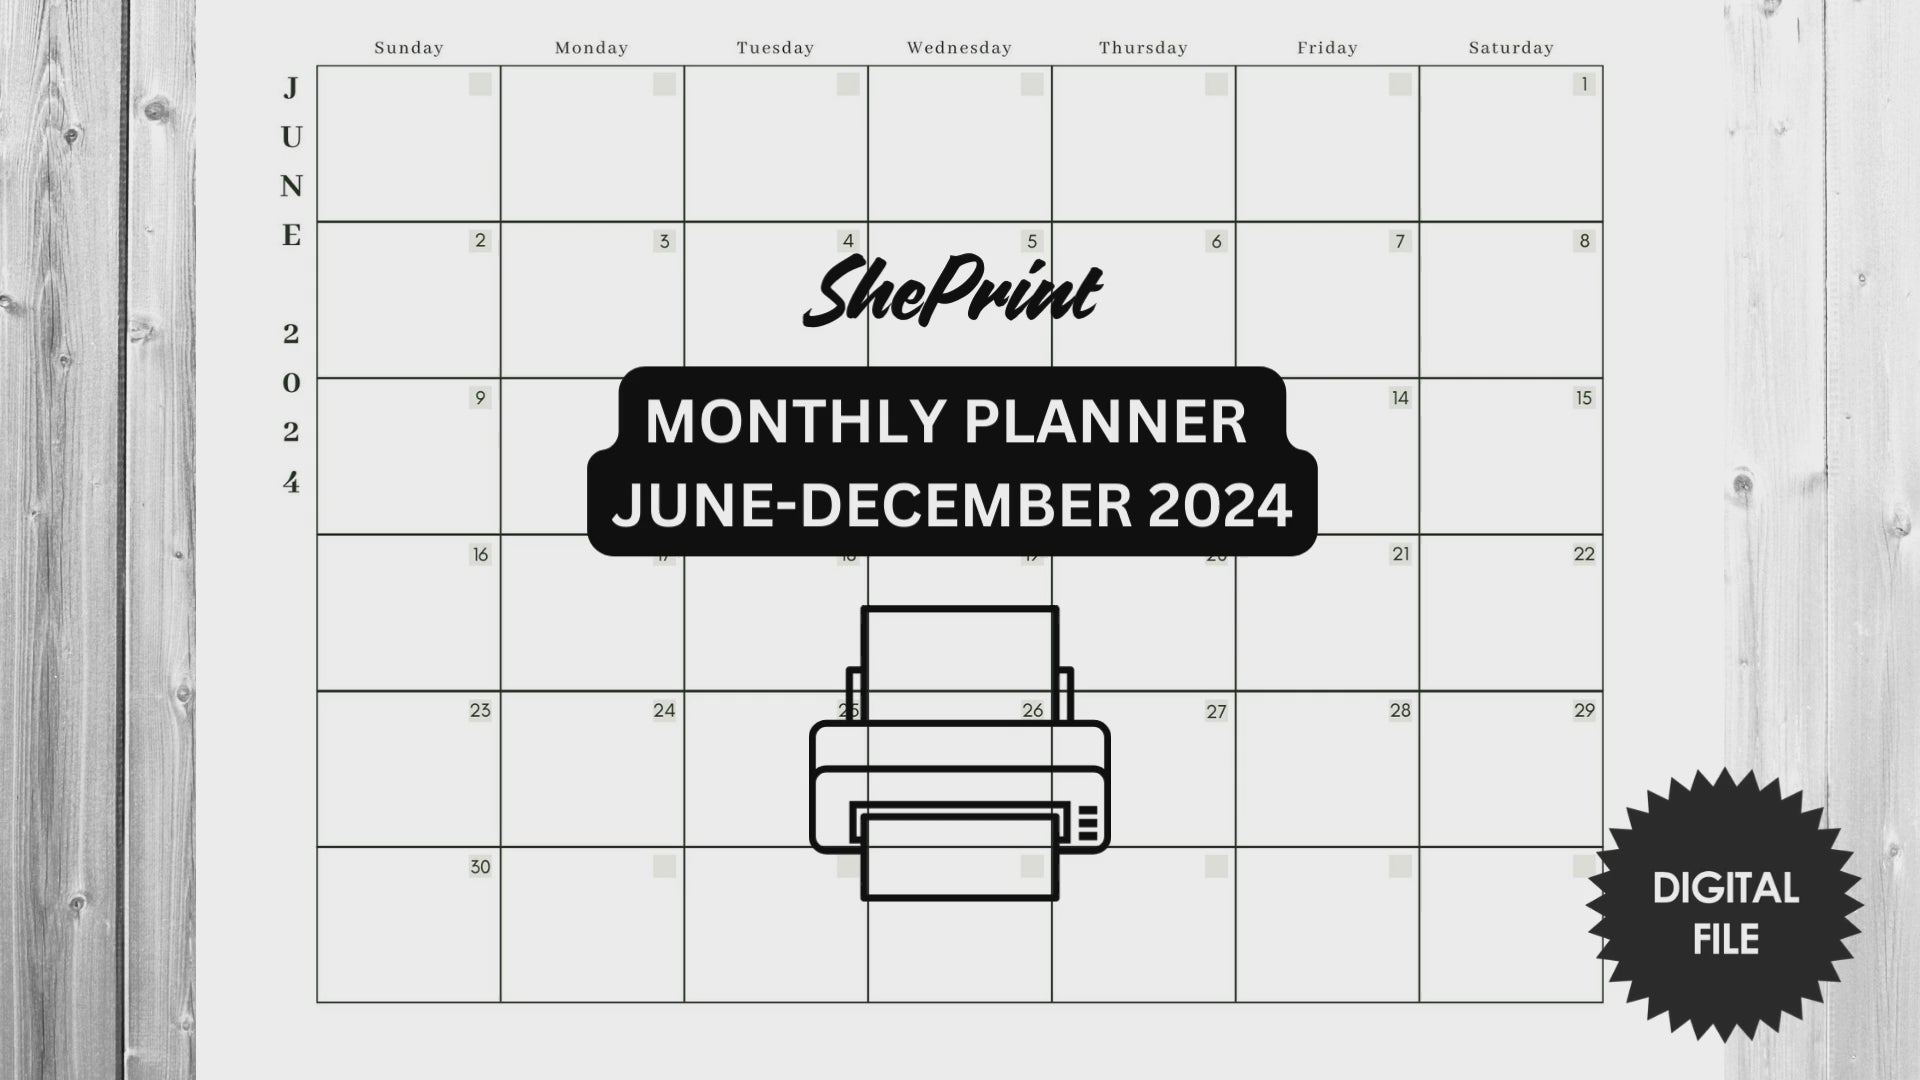 Printable Monthly Planner, From June-December 2024, Print A4 or A2 Poster Size video preview